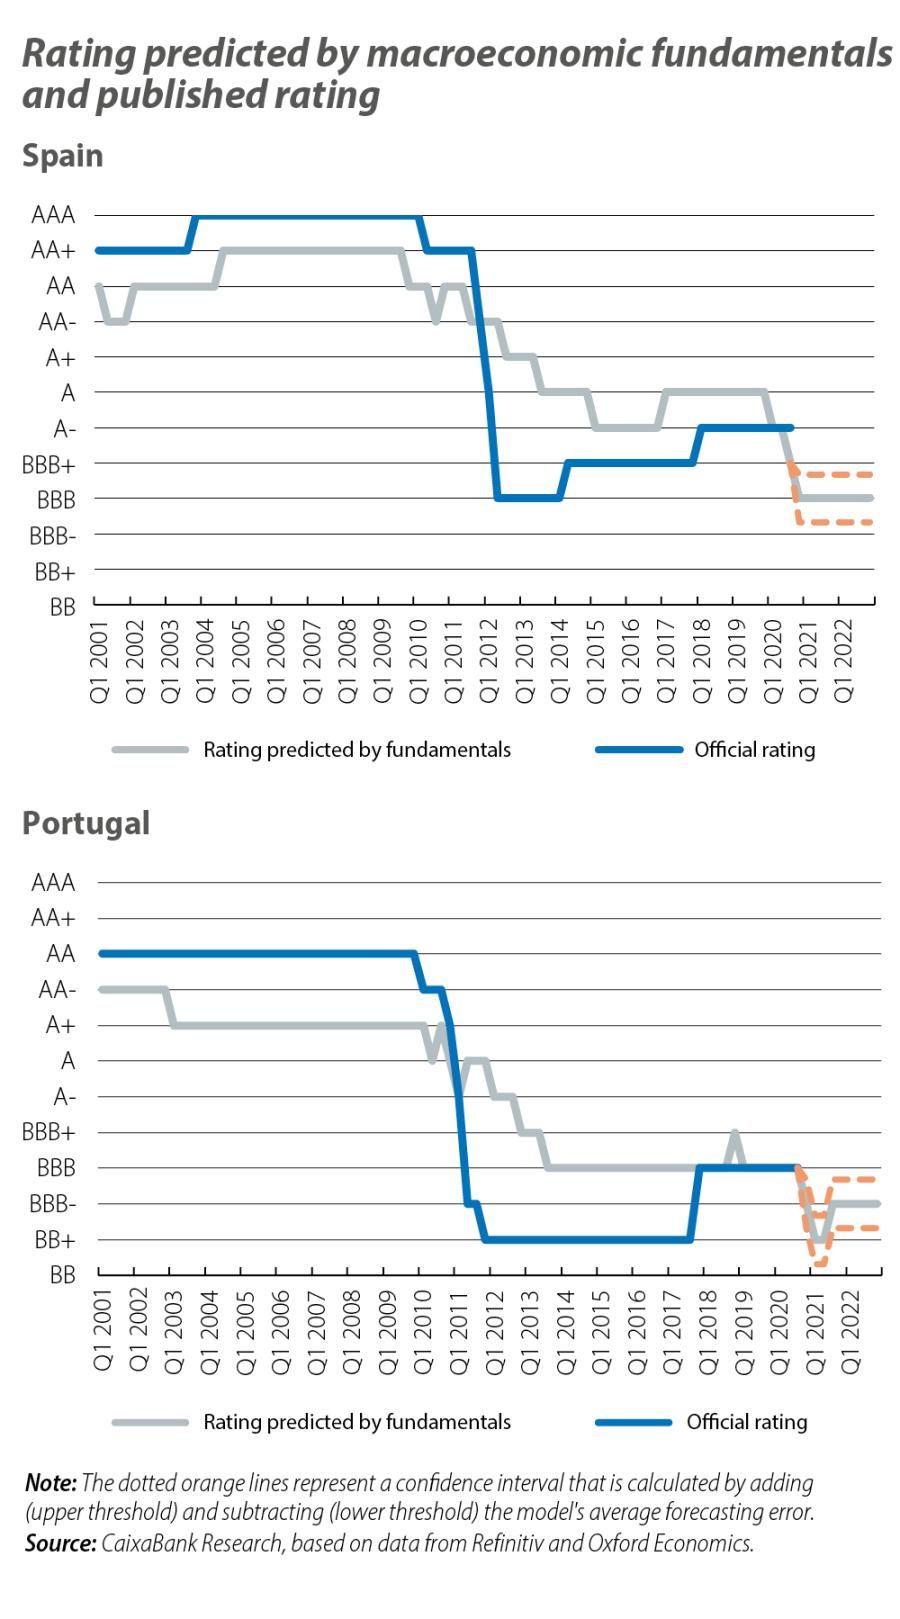 Rating predicted by macroeconomic fundamentals and published rating